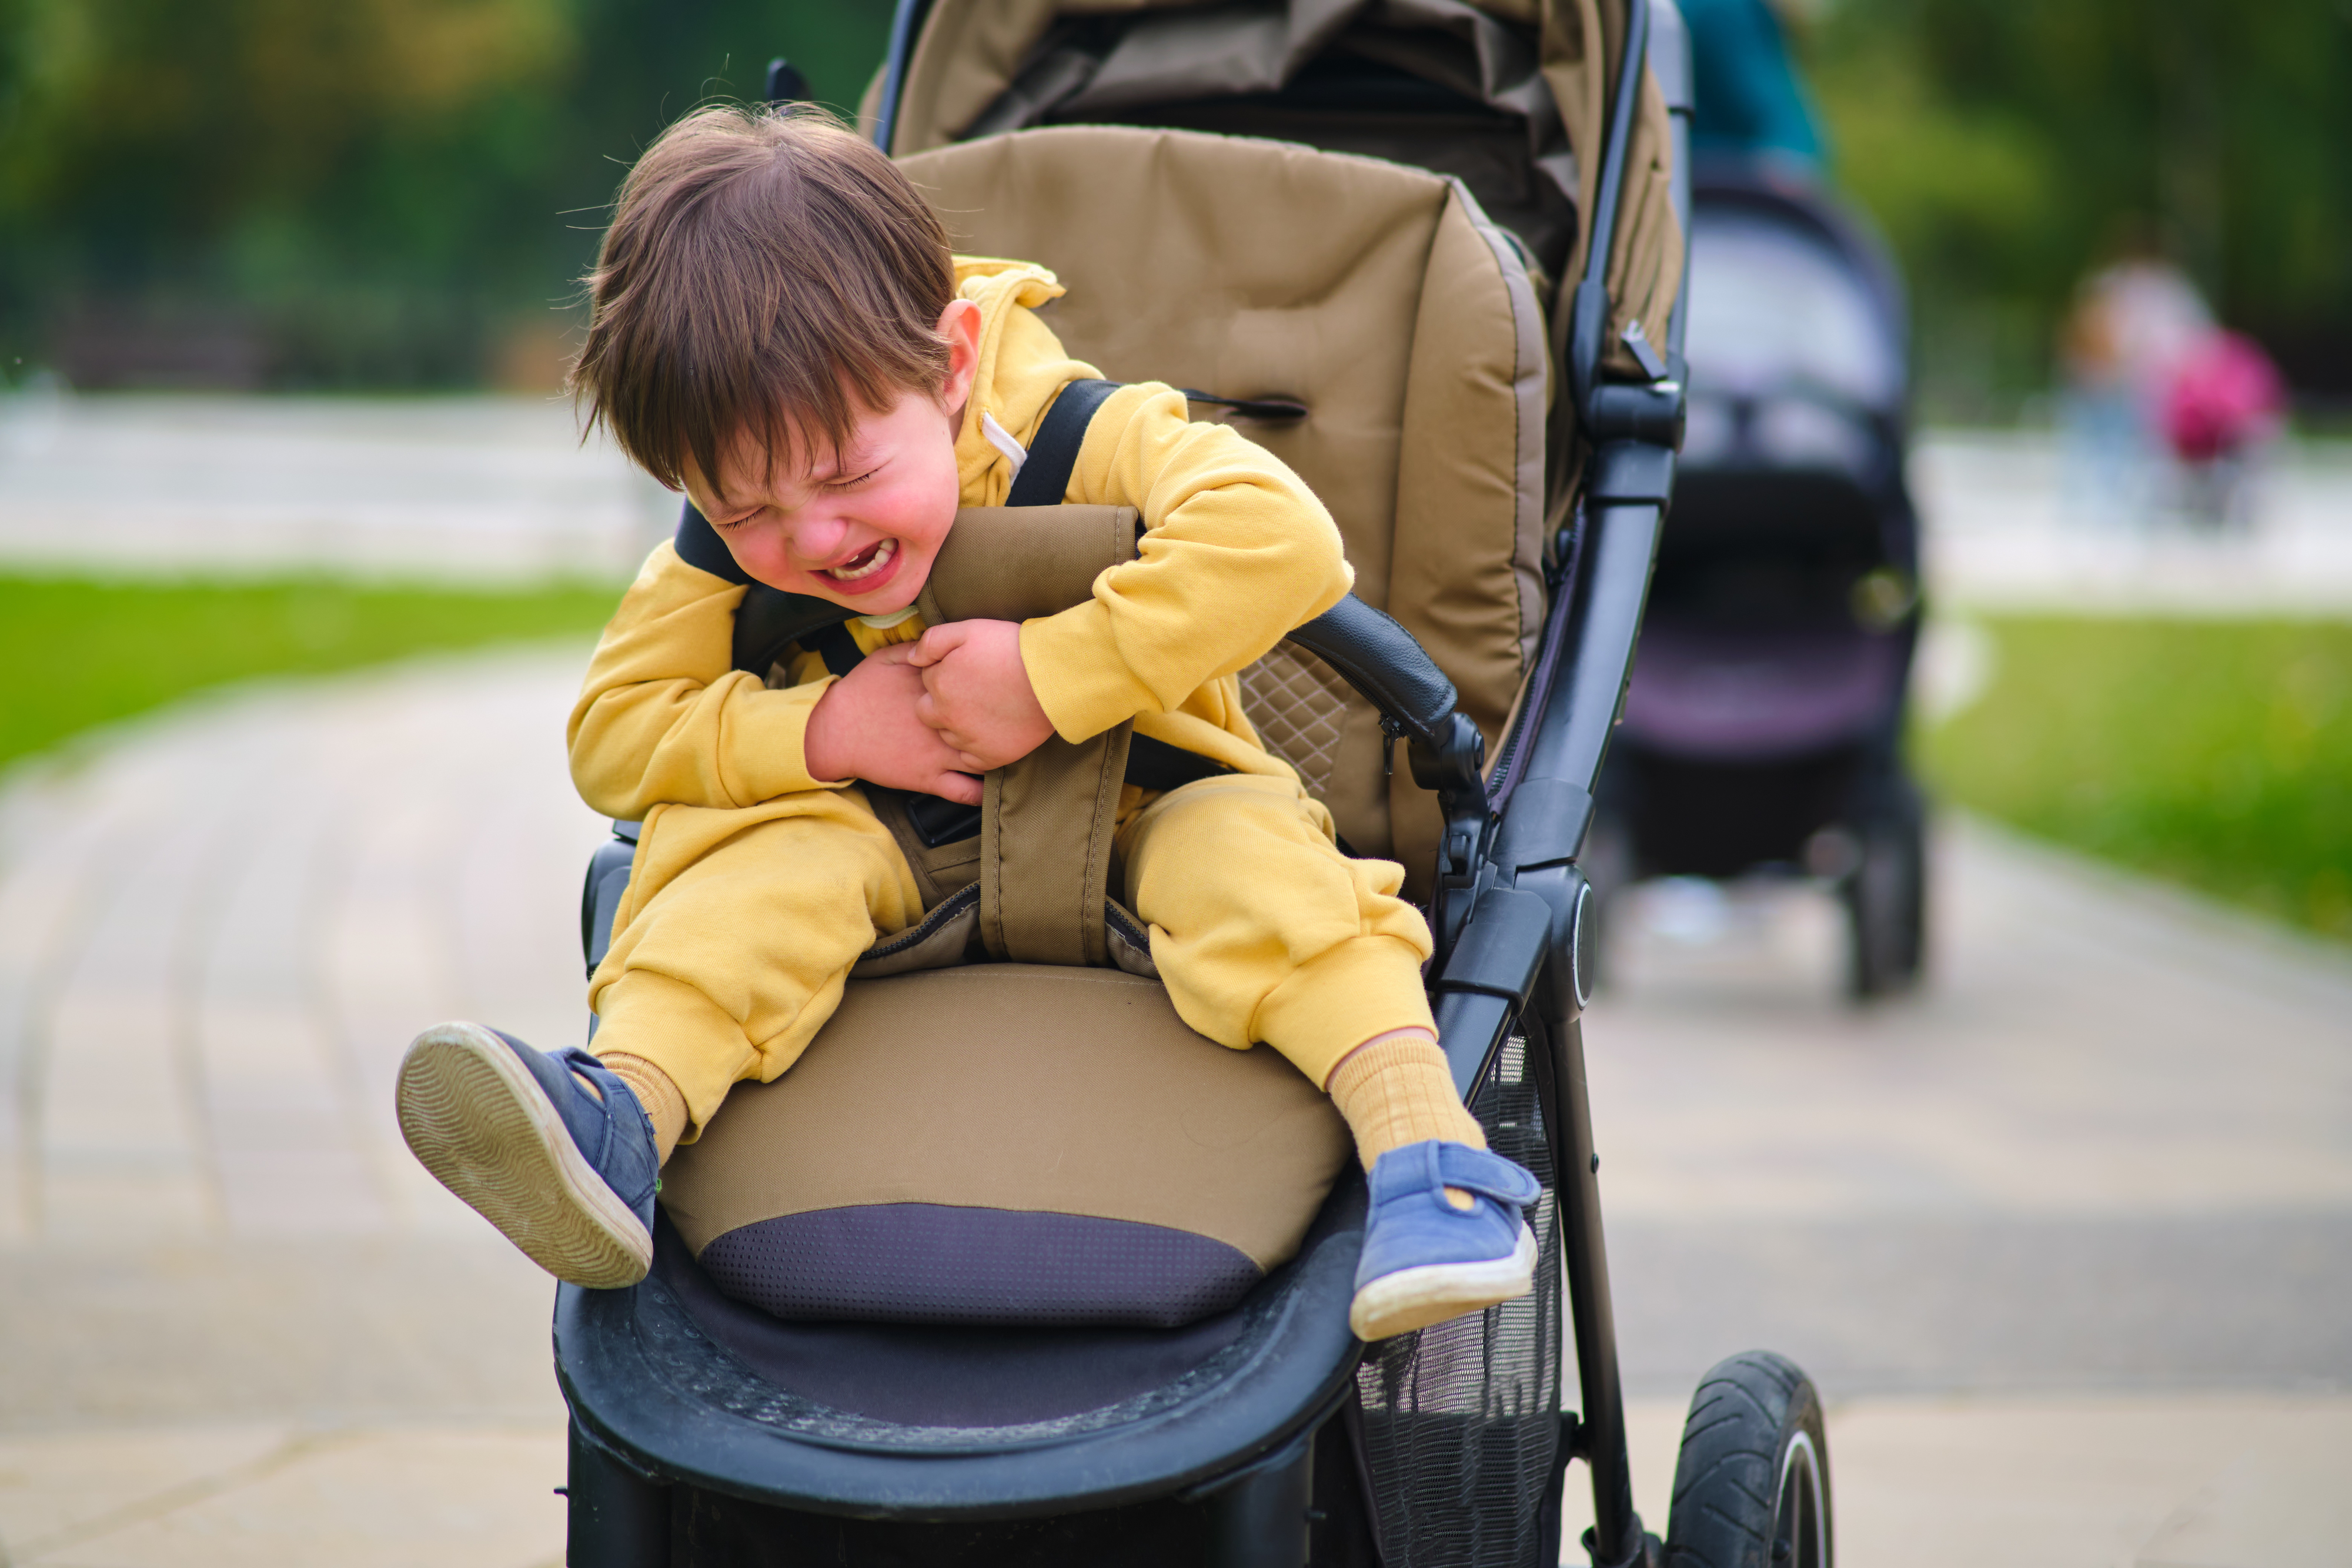 a young toddler in the park screaming in their stroller